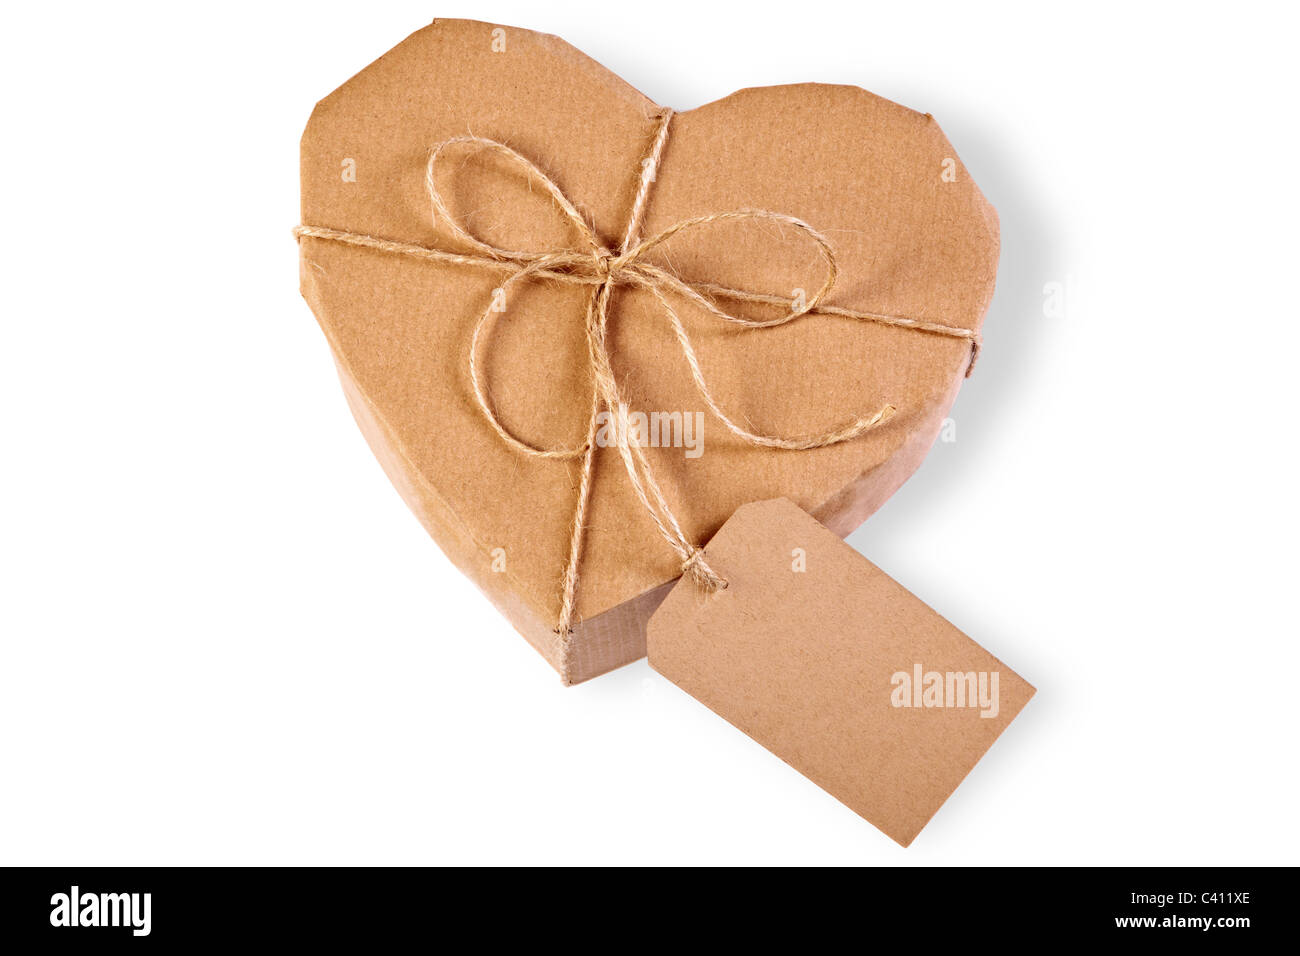 Photo of a heart gift box wrapped in brown paper with label, isolated on a white background. Stock Photo